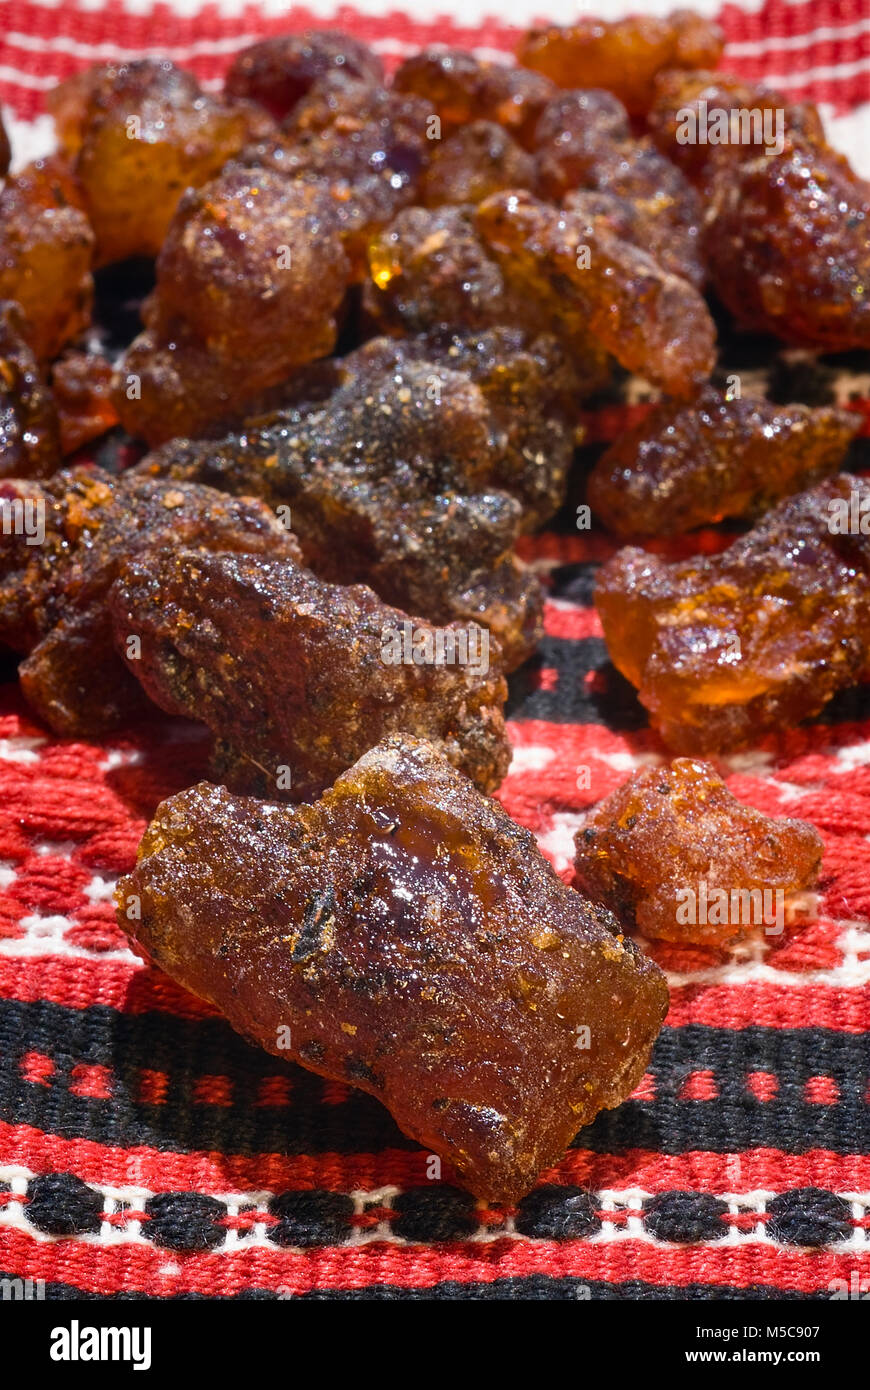 Opoponax, Agarsu balsam or sweet myrrh (Commiphora erythraea)  is a resin used as incense Stock Photo